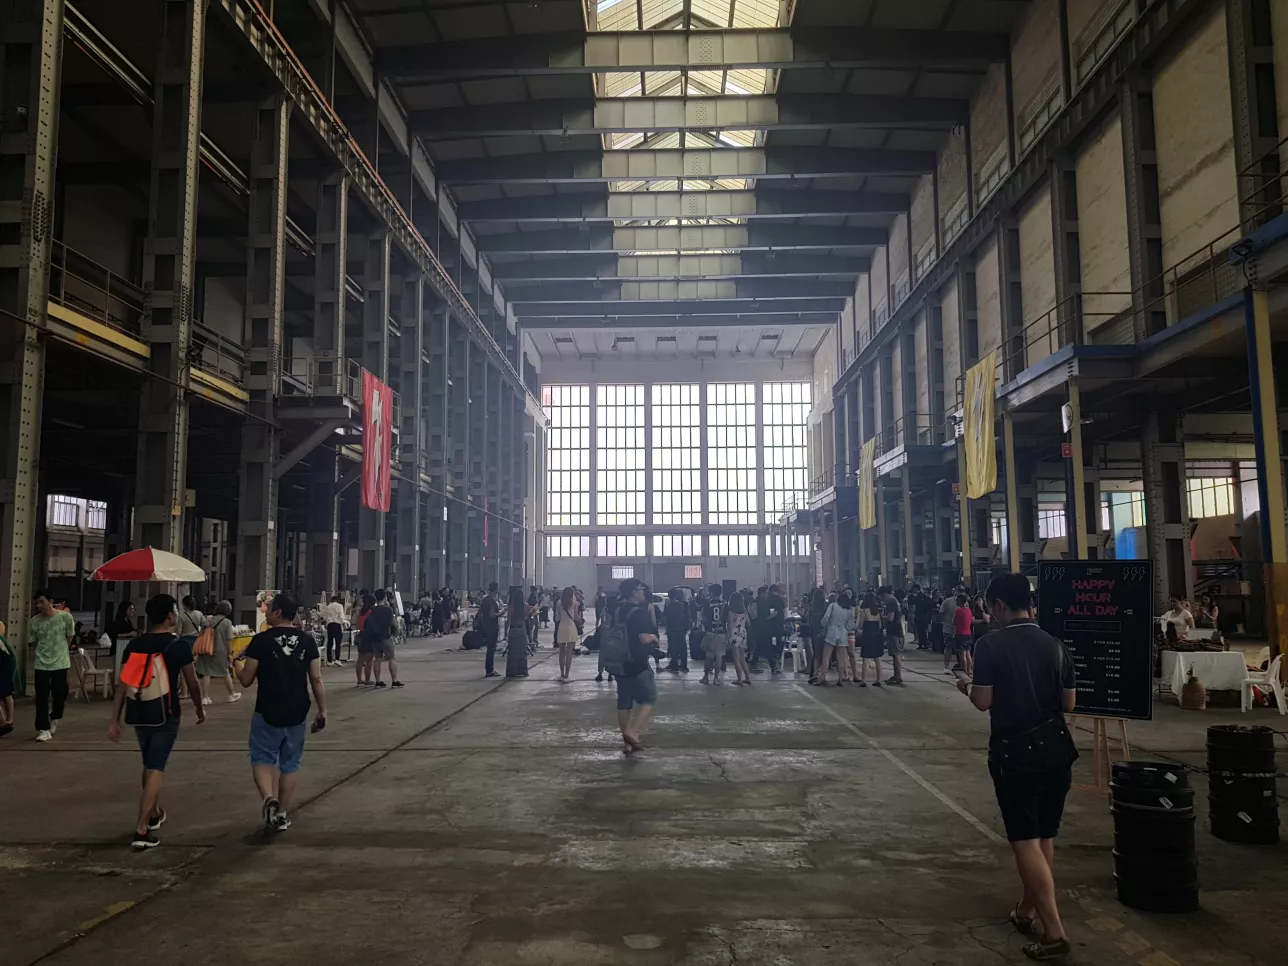 Inside an old warehouse in Singapore. people walkig around. Photo.